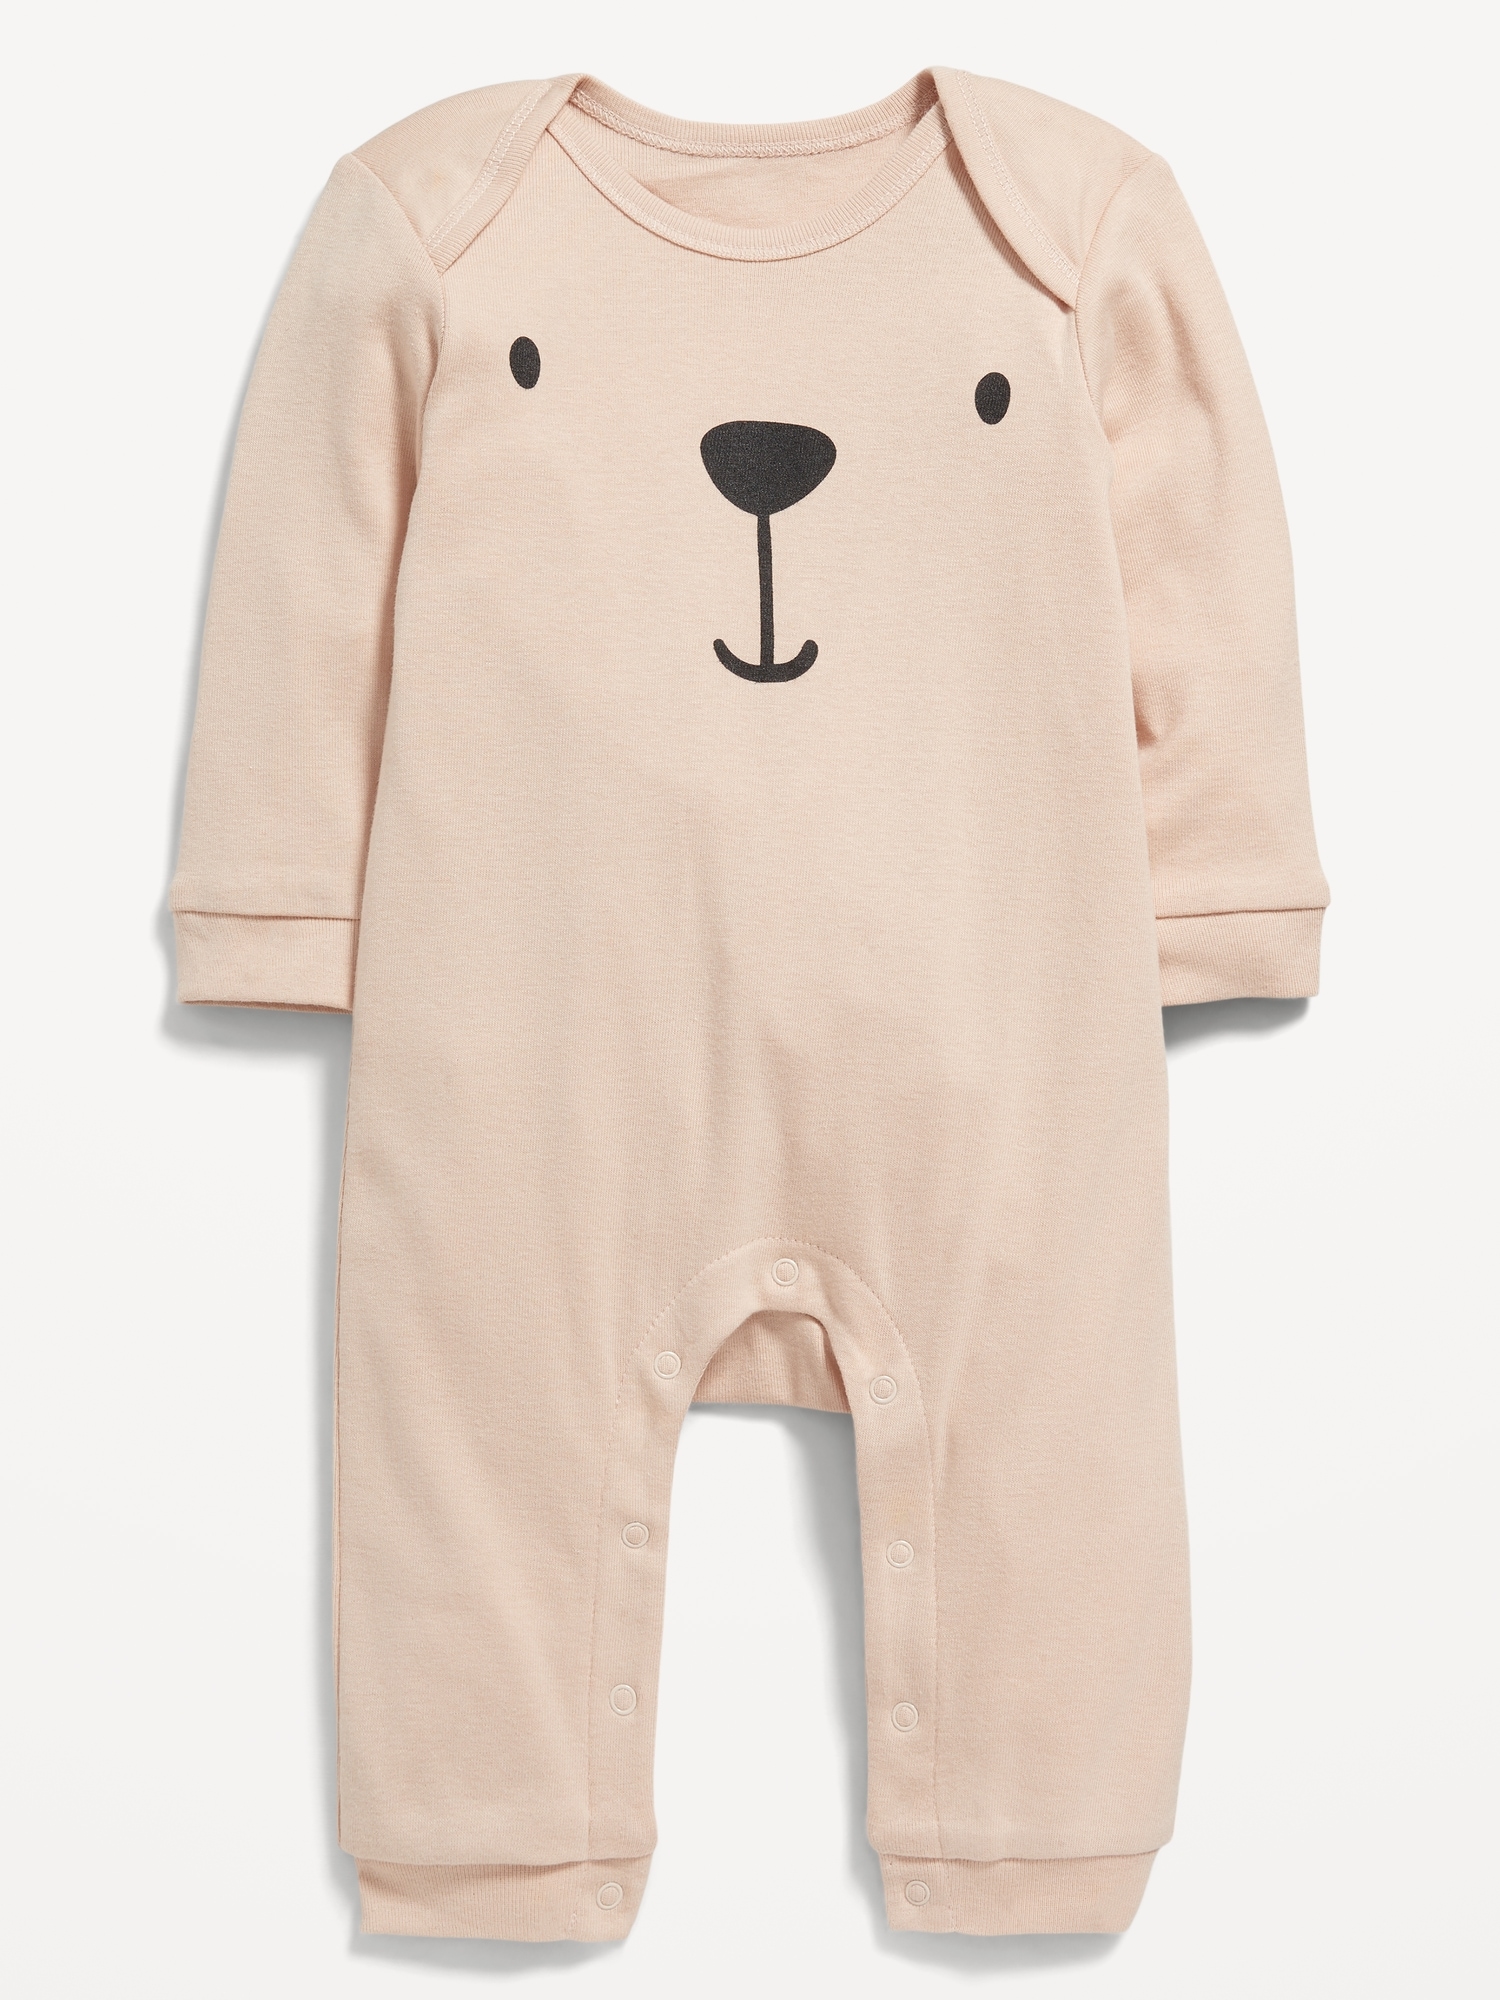 Unisex Organic-Cotton Graphic One-Piece for Baby Hot Deal